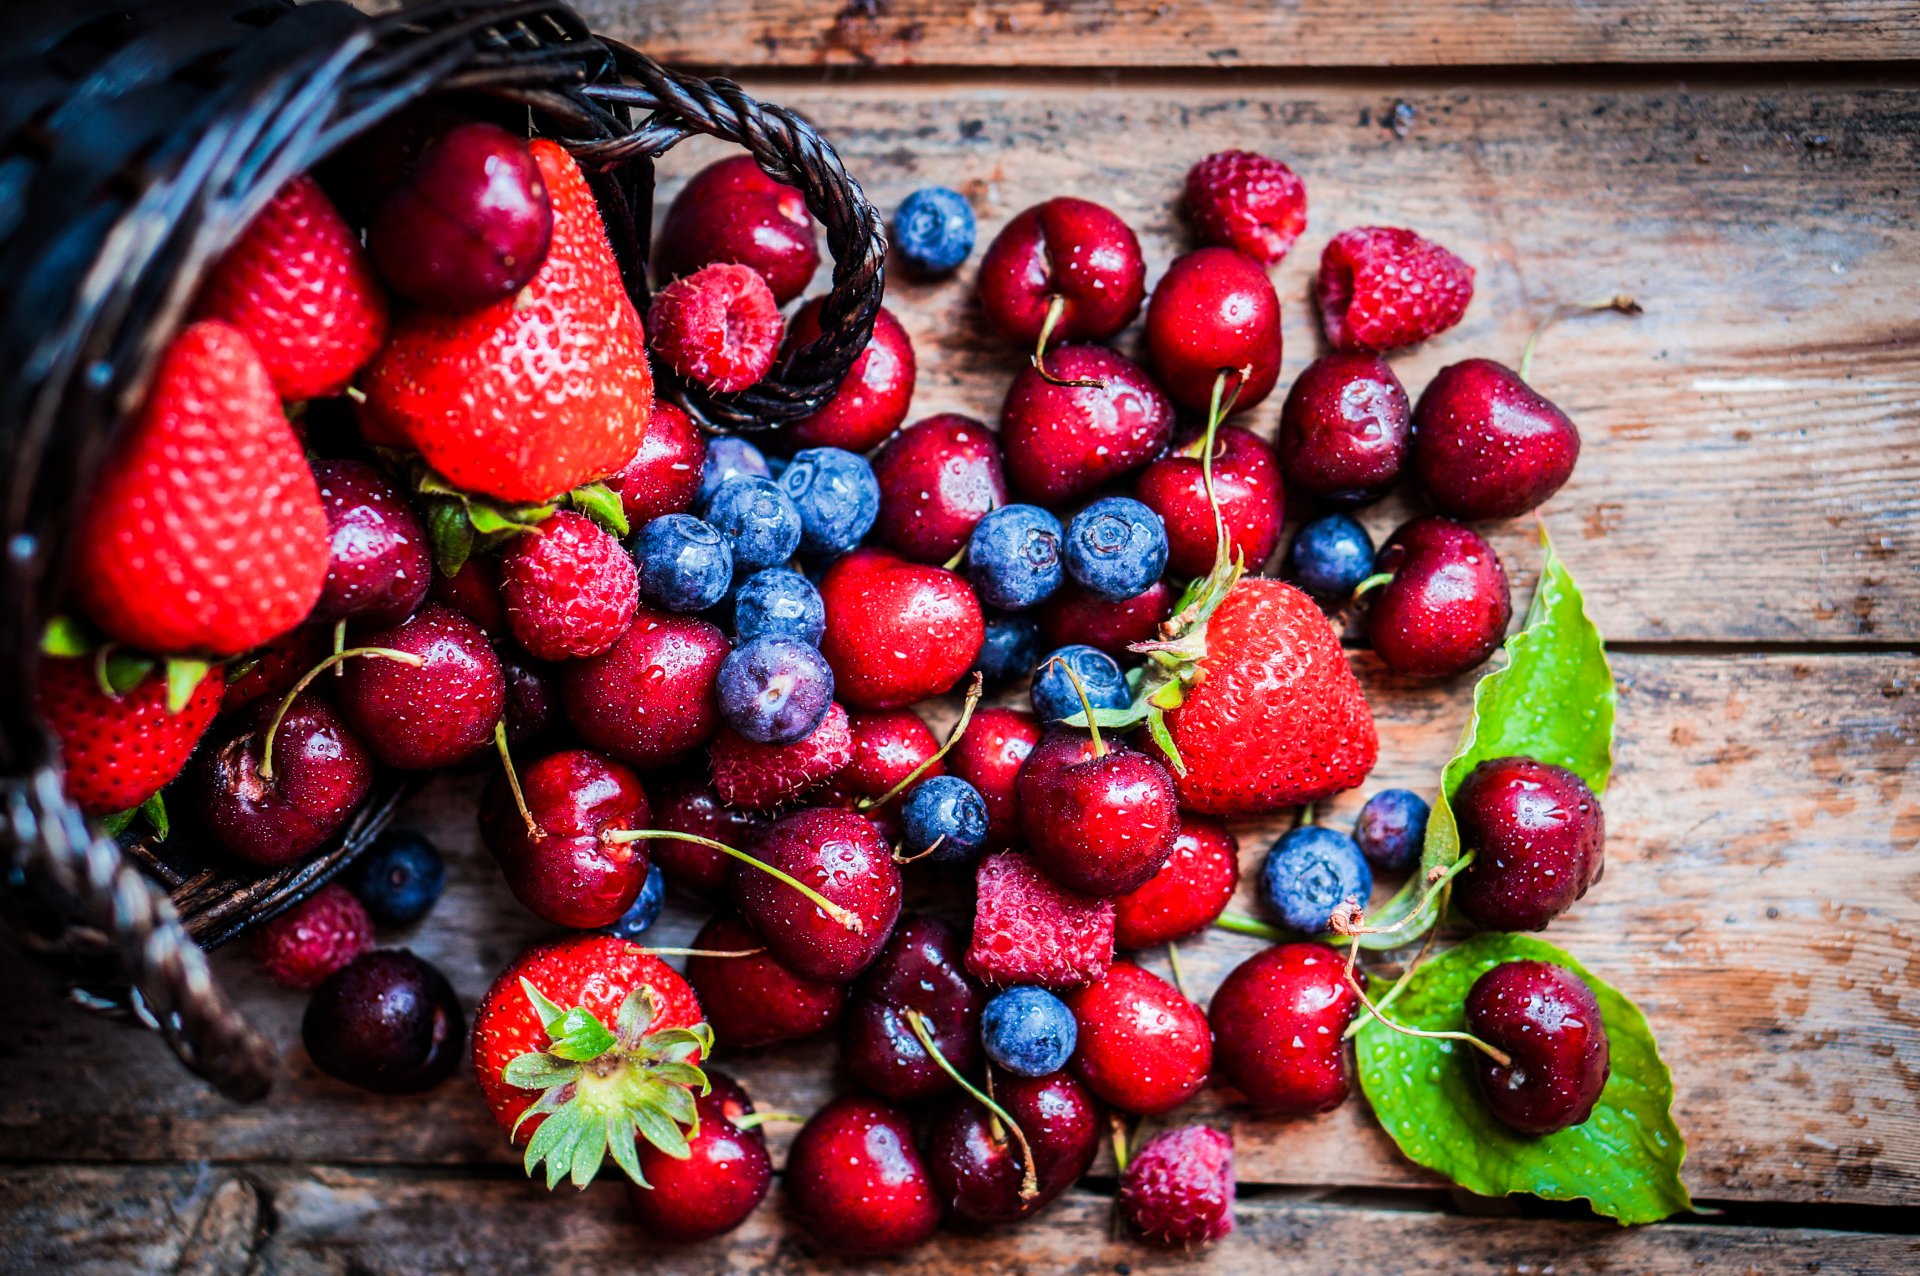 HOW BERRIES COULD REDUCE BLOOD SUGAR LEVELS